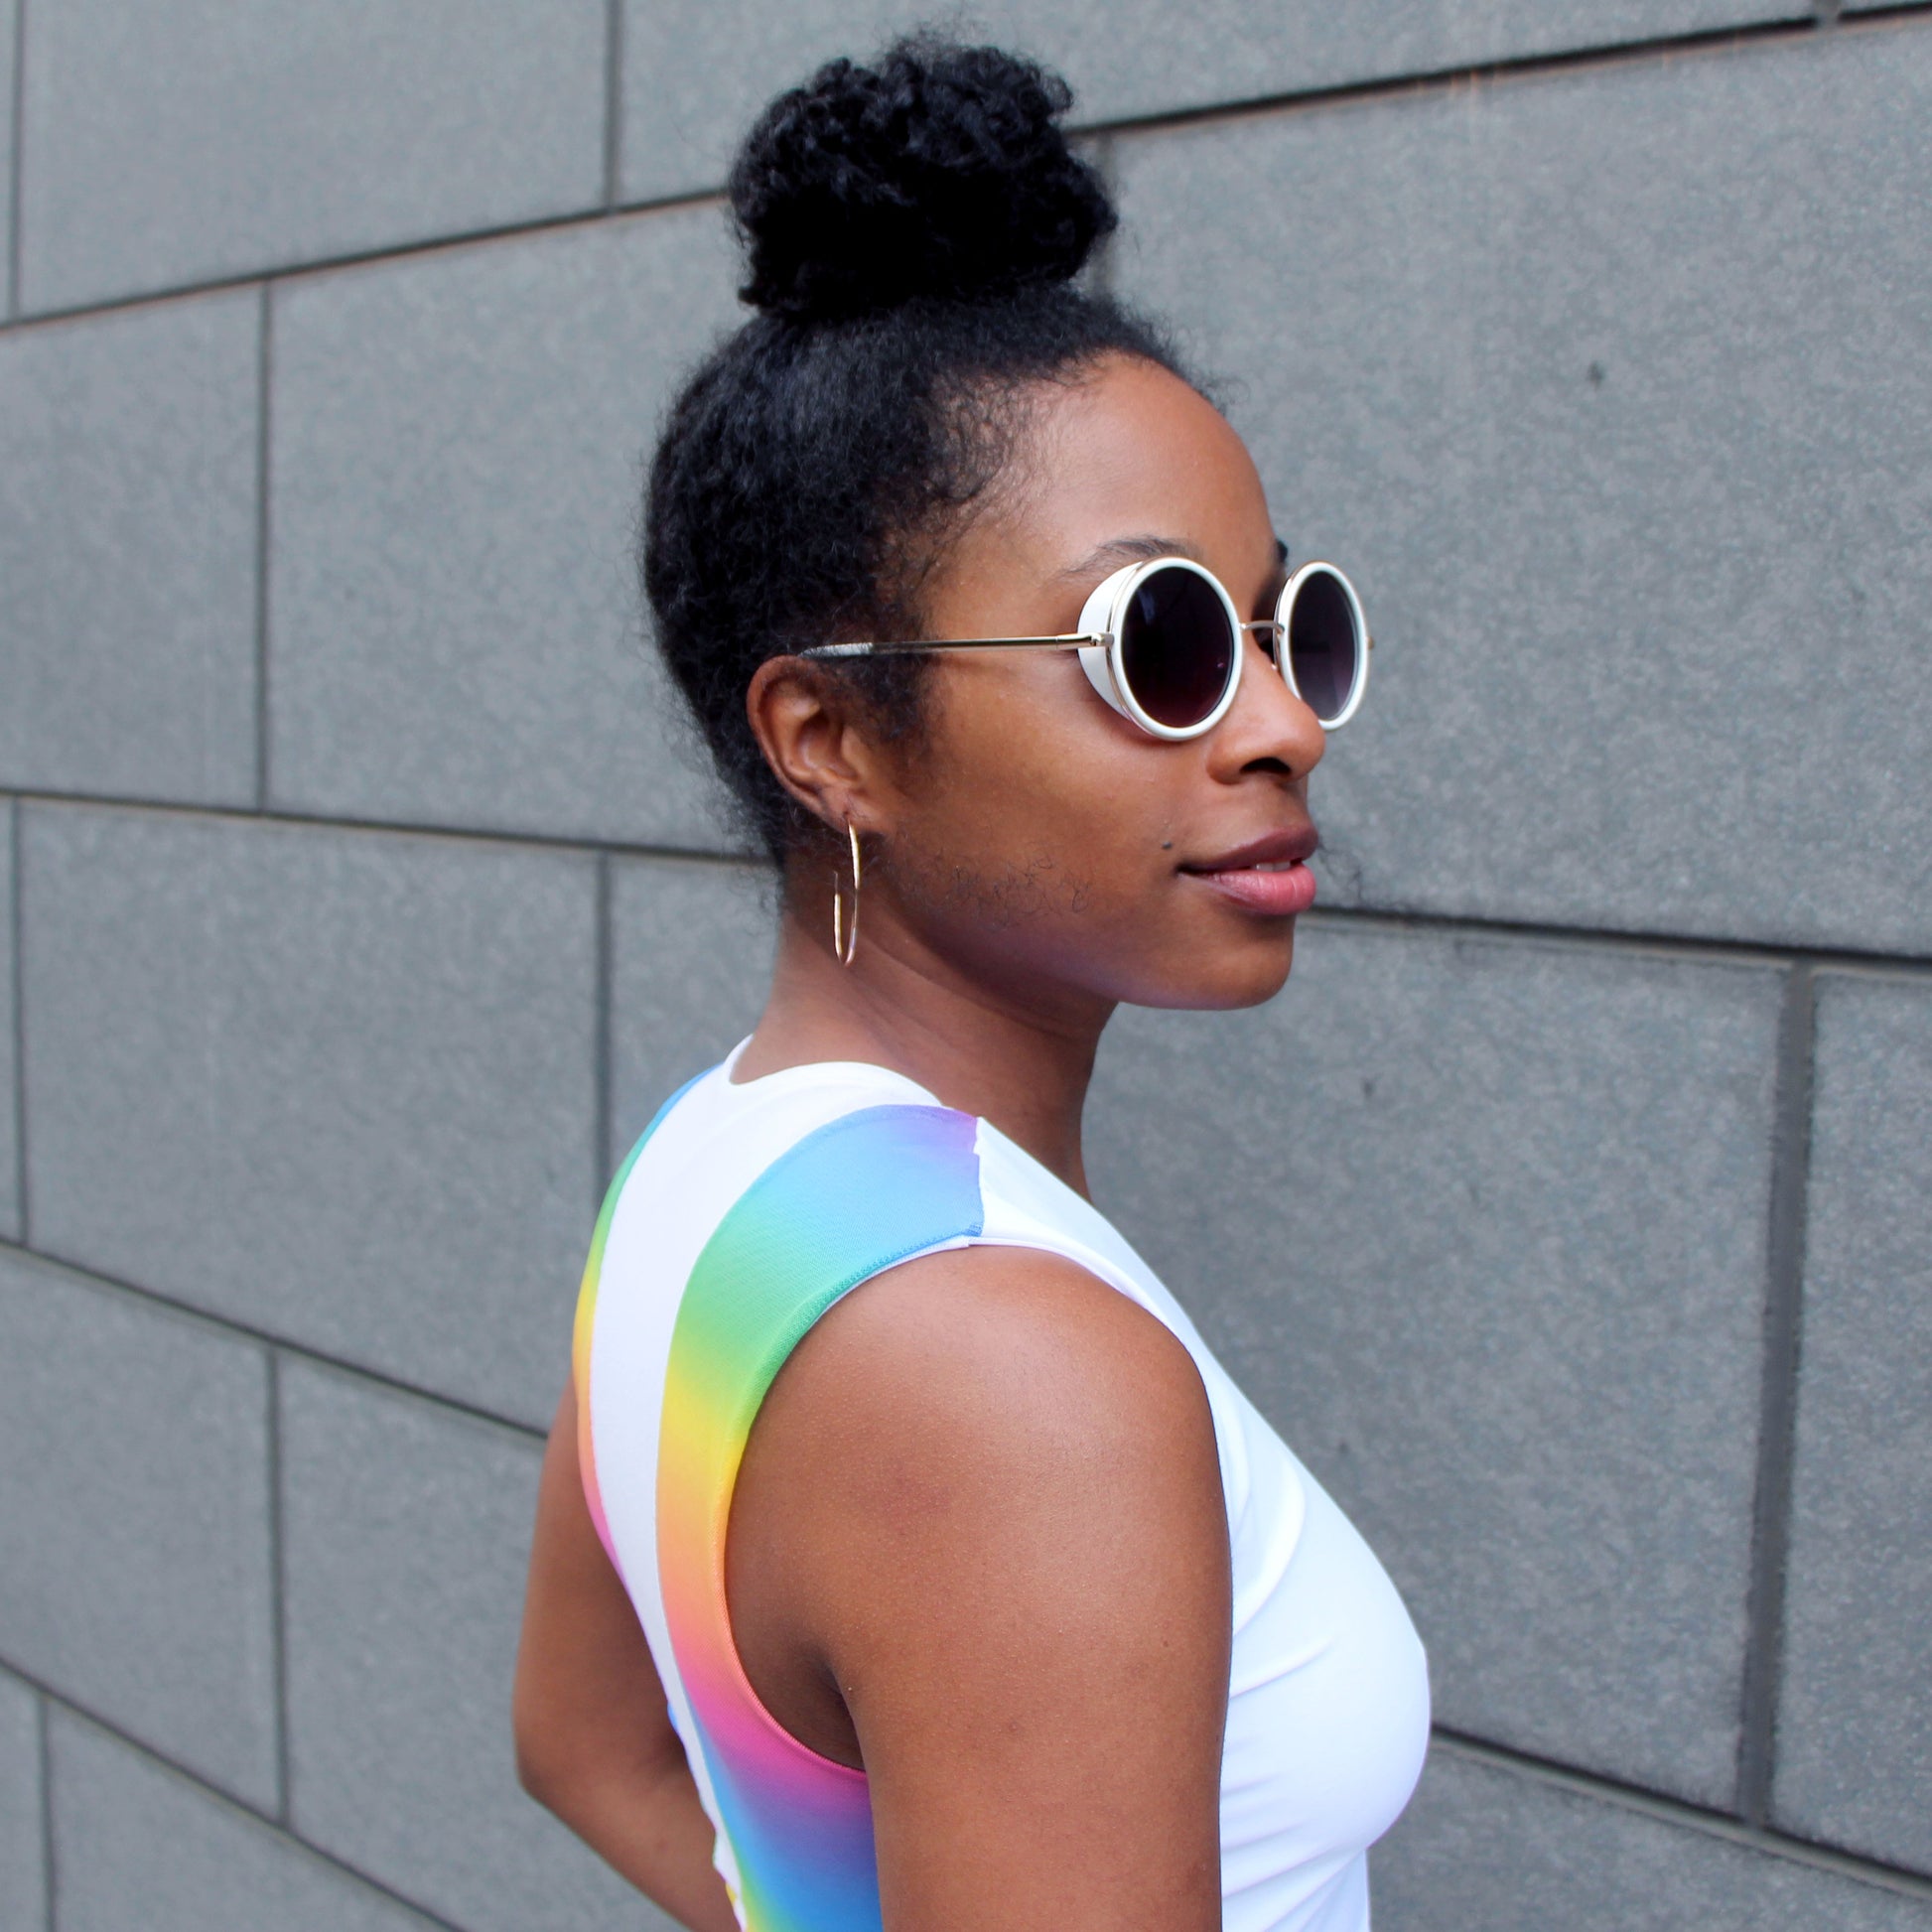 A 3/4 closeup of a woman wearing a white and rainbow top